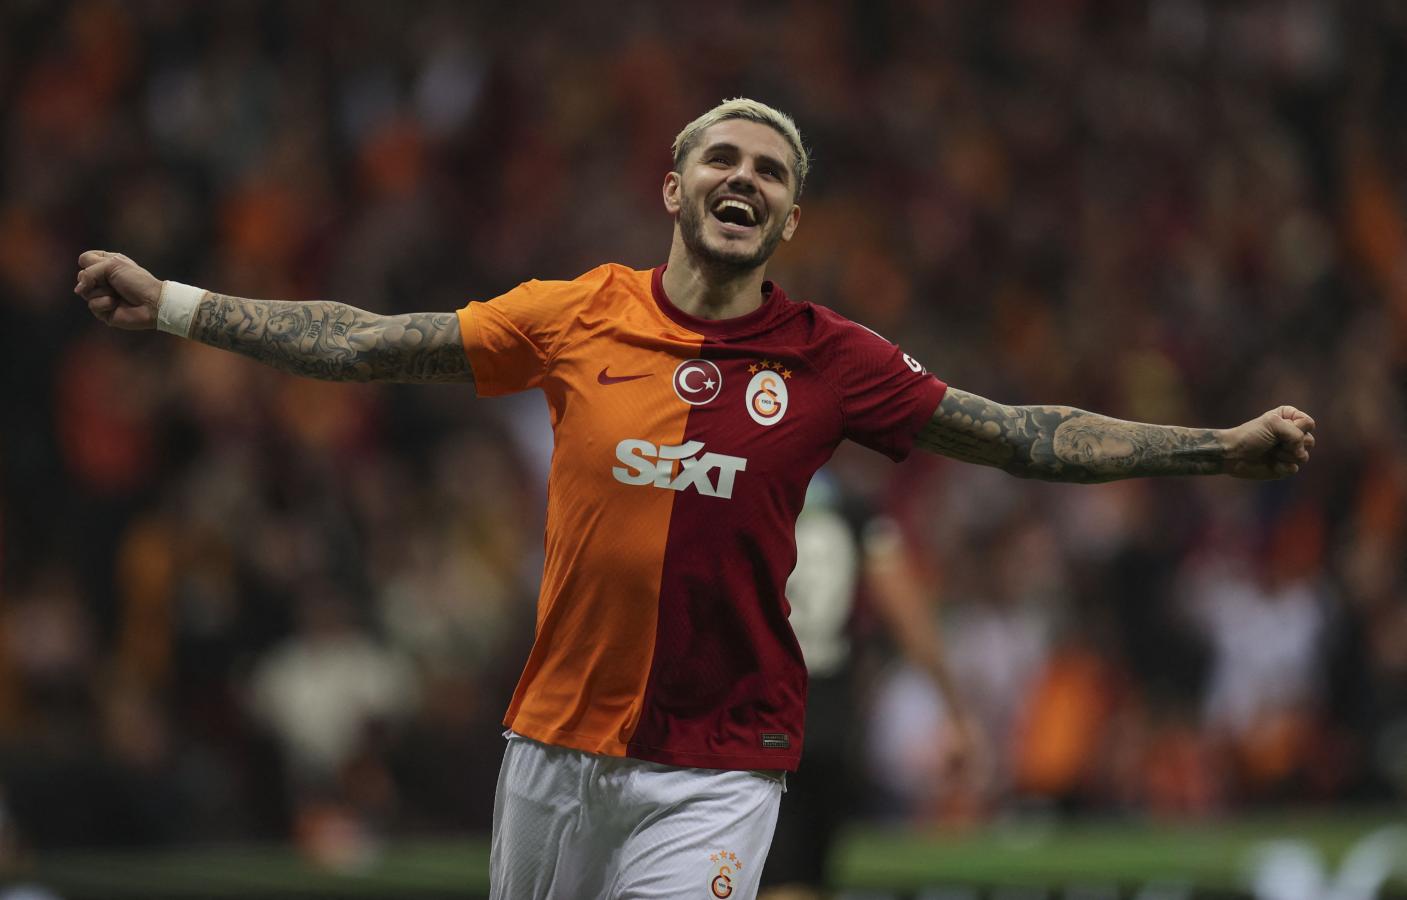 Mauro Icardi From Galatasaray to Real Madrid